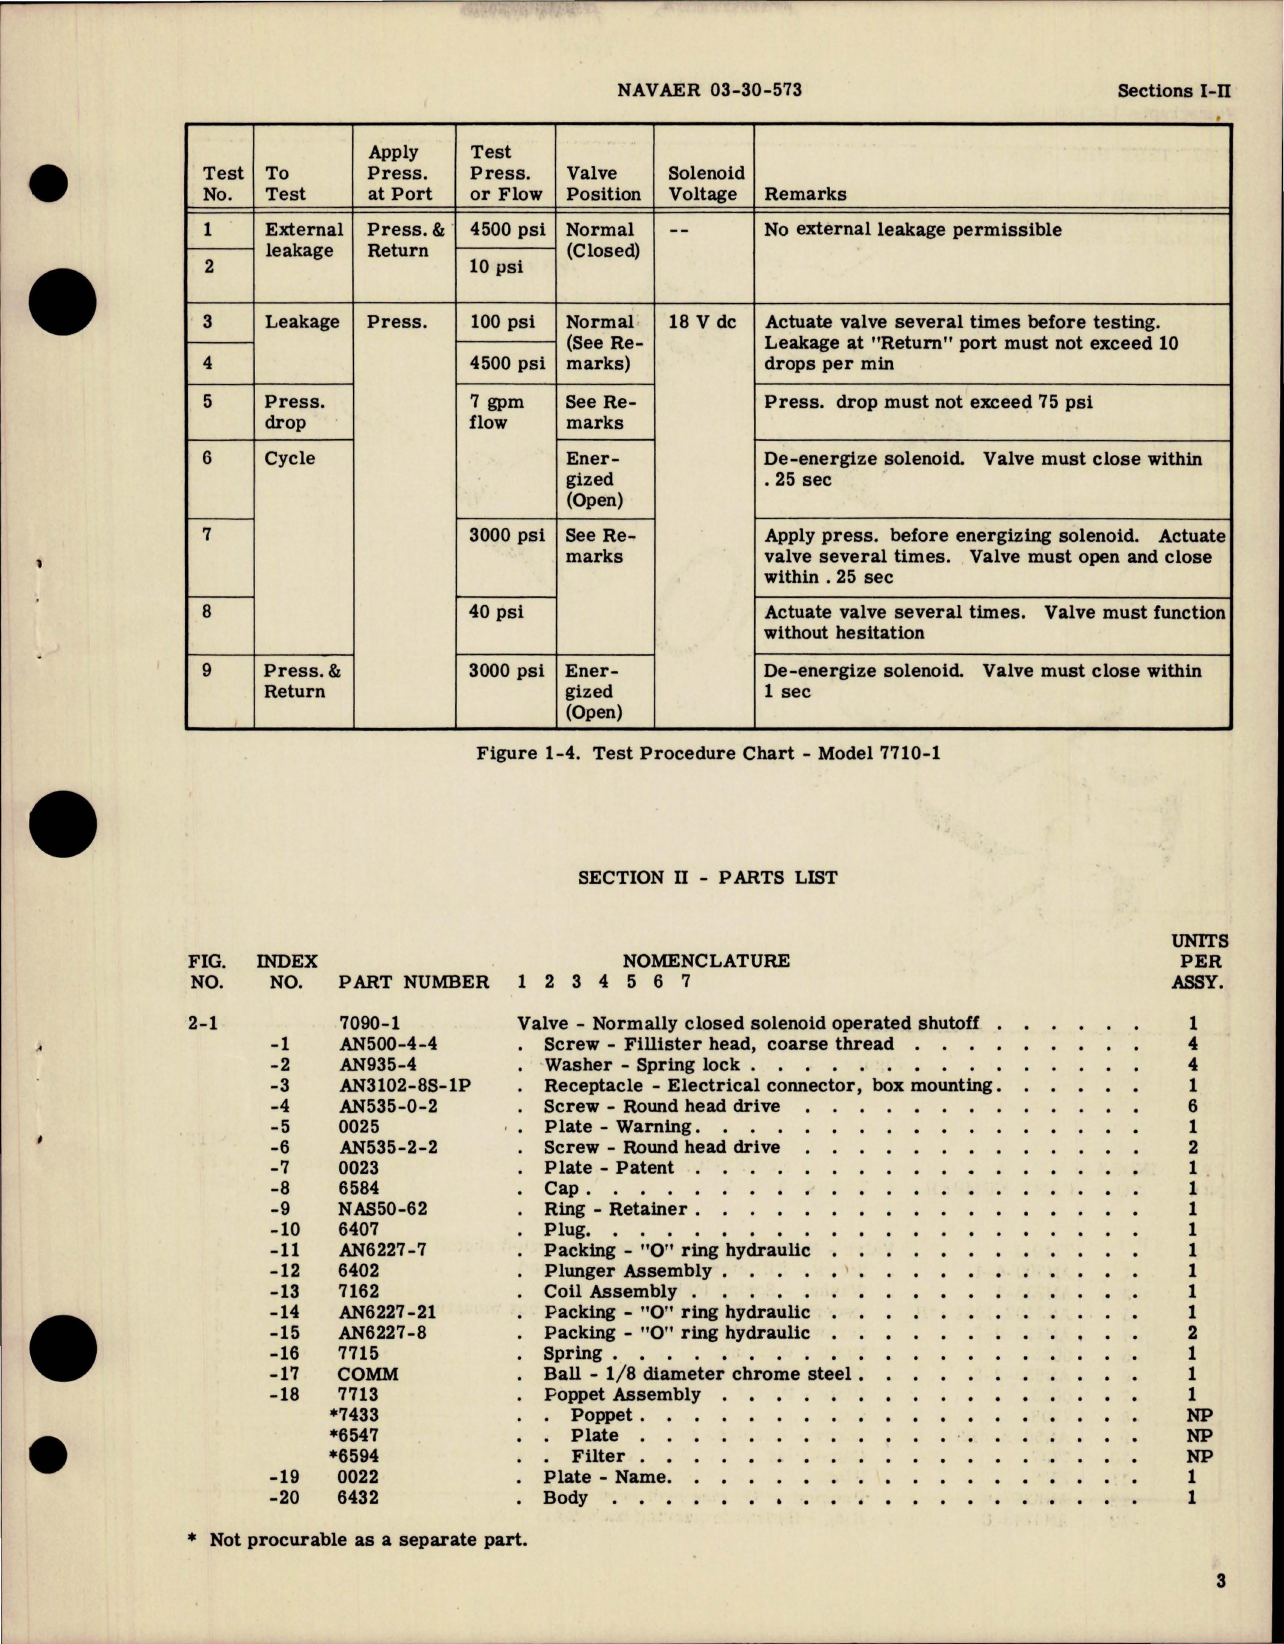 Sample page 5 from AirCorps Library document: Overhaul Instructions with Parts Catalog for Normally Closed Solenoid Operated Shutoff Valves - Models 7090-1 and 7710-1